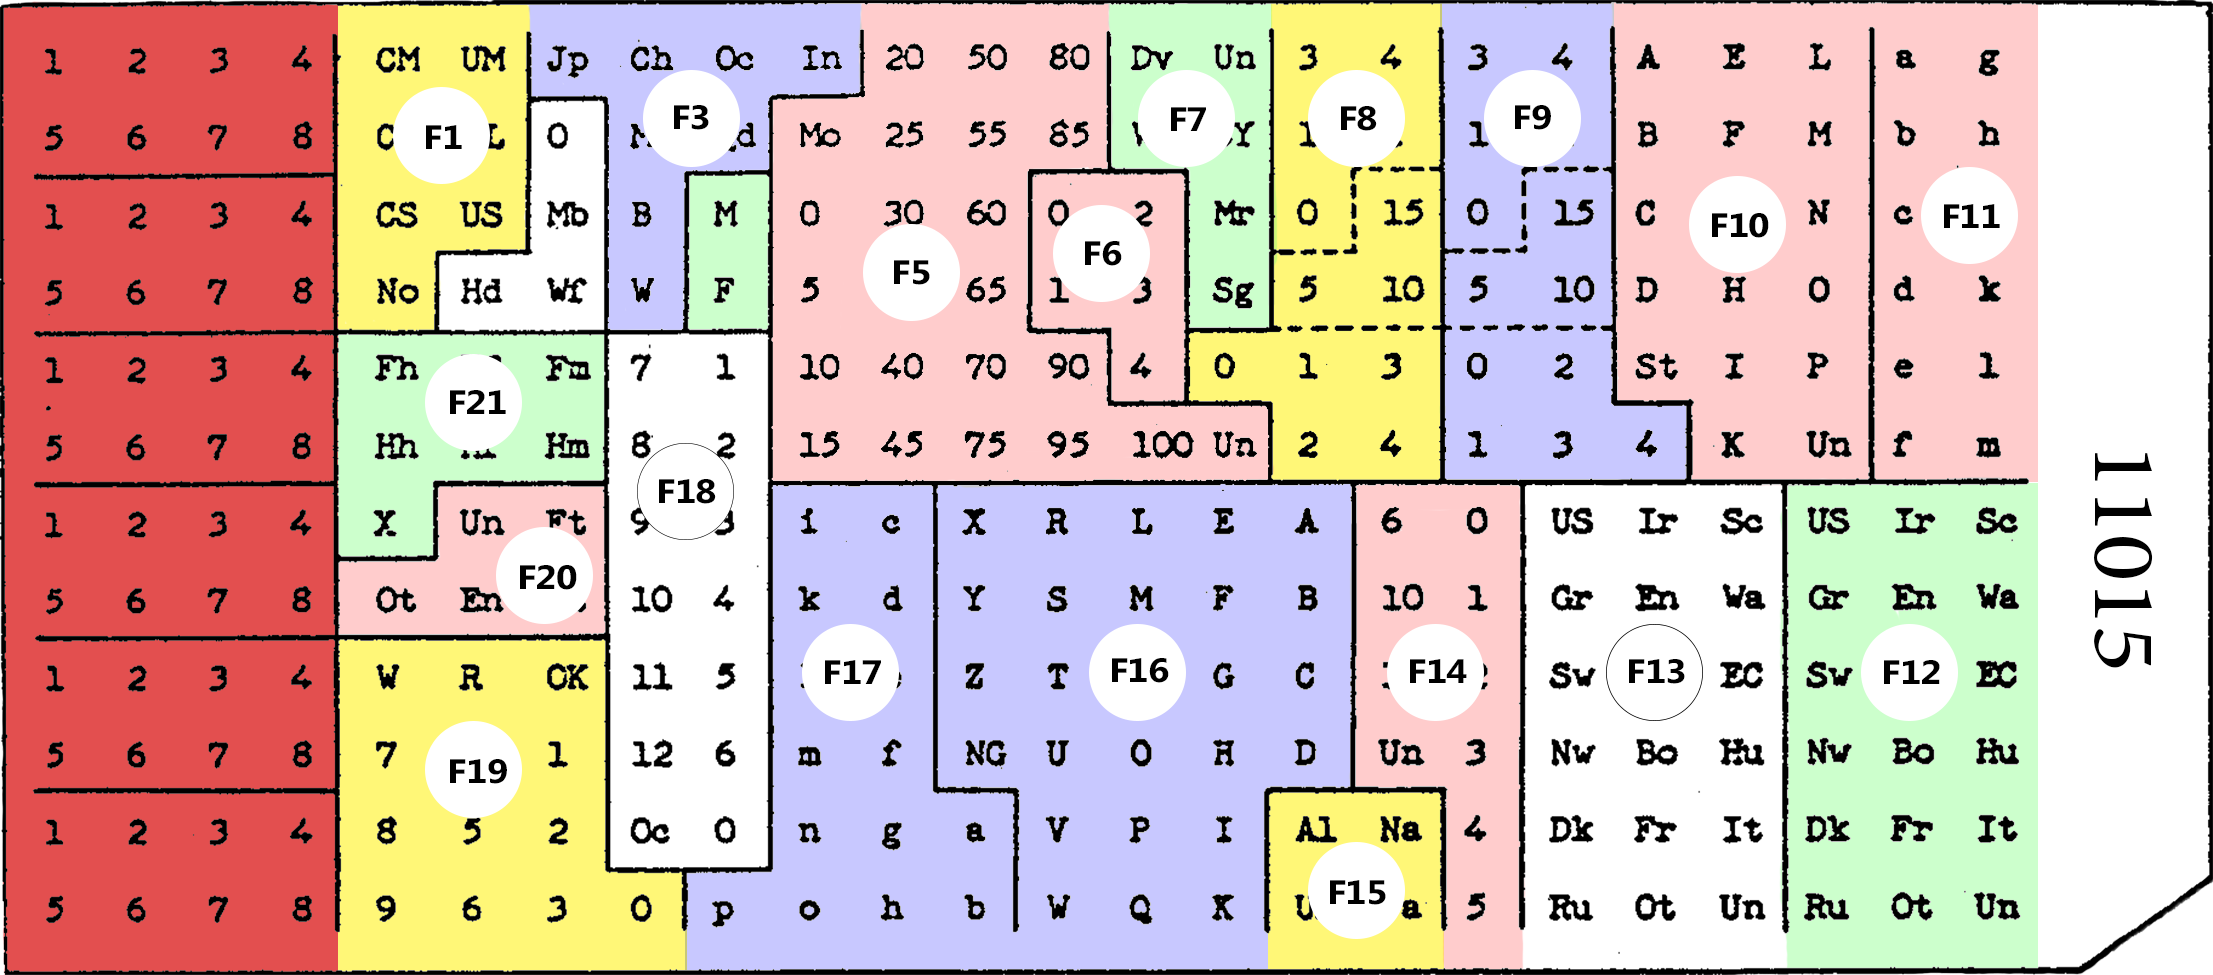 Hollerith Card: This is a color-coded key for the meaning of the codes used on the 1890 Hollerith Card.